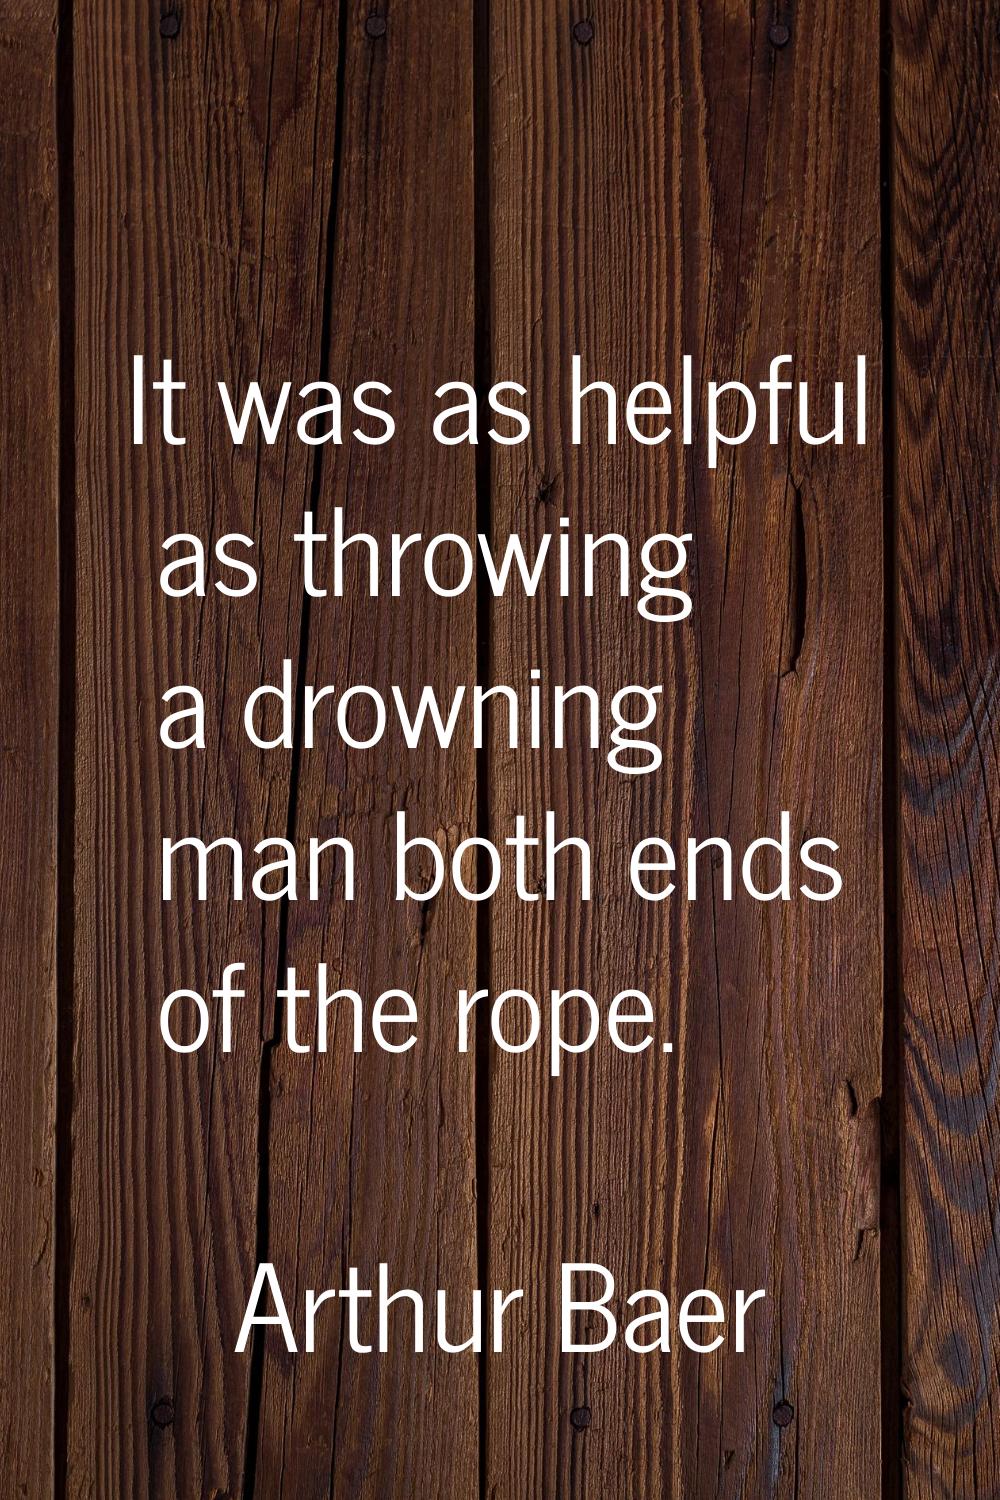 It was as helpful as throwing a drowning man both ends of the rope.